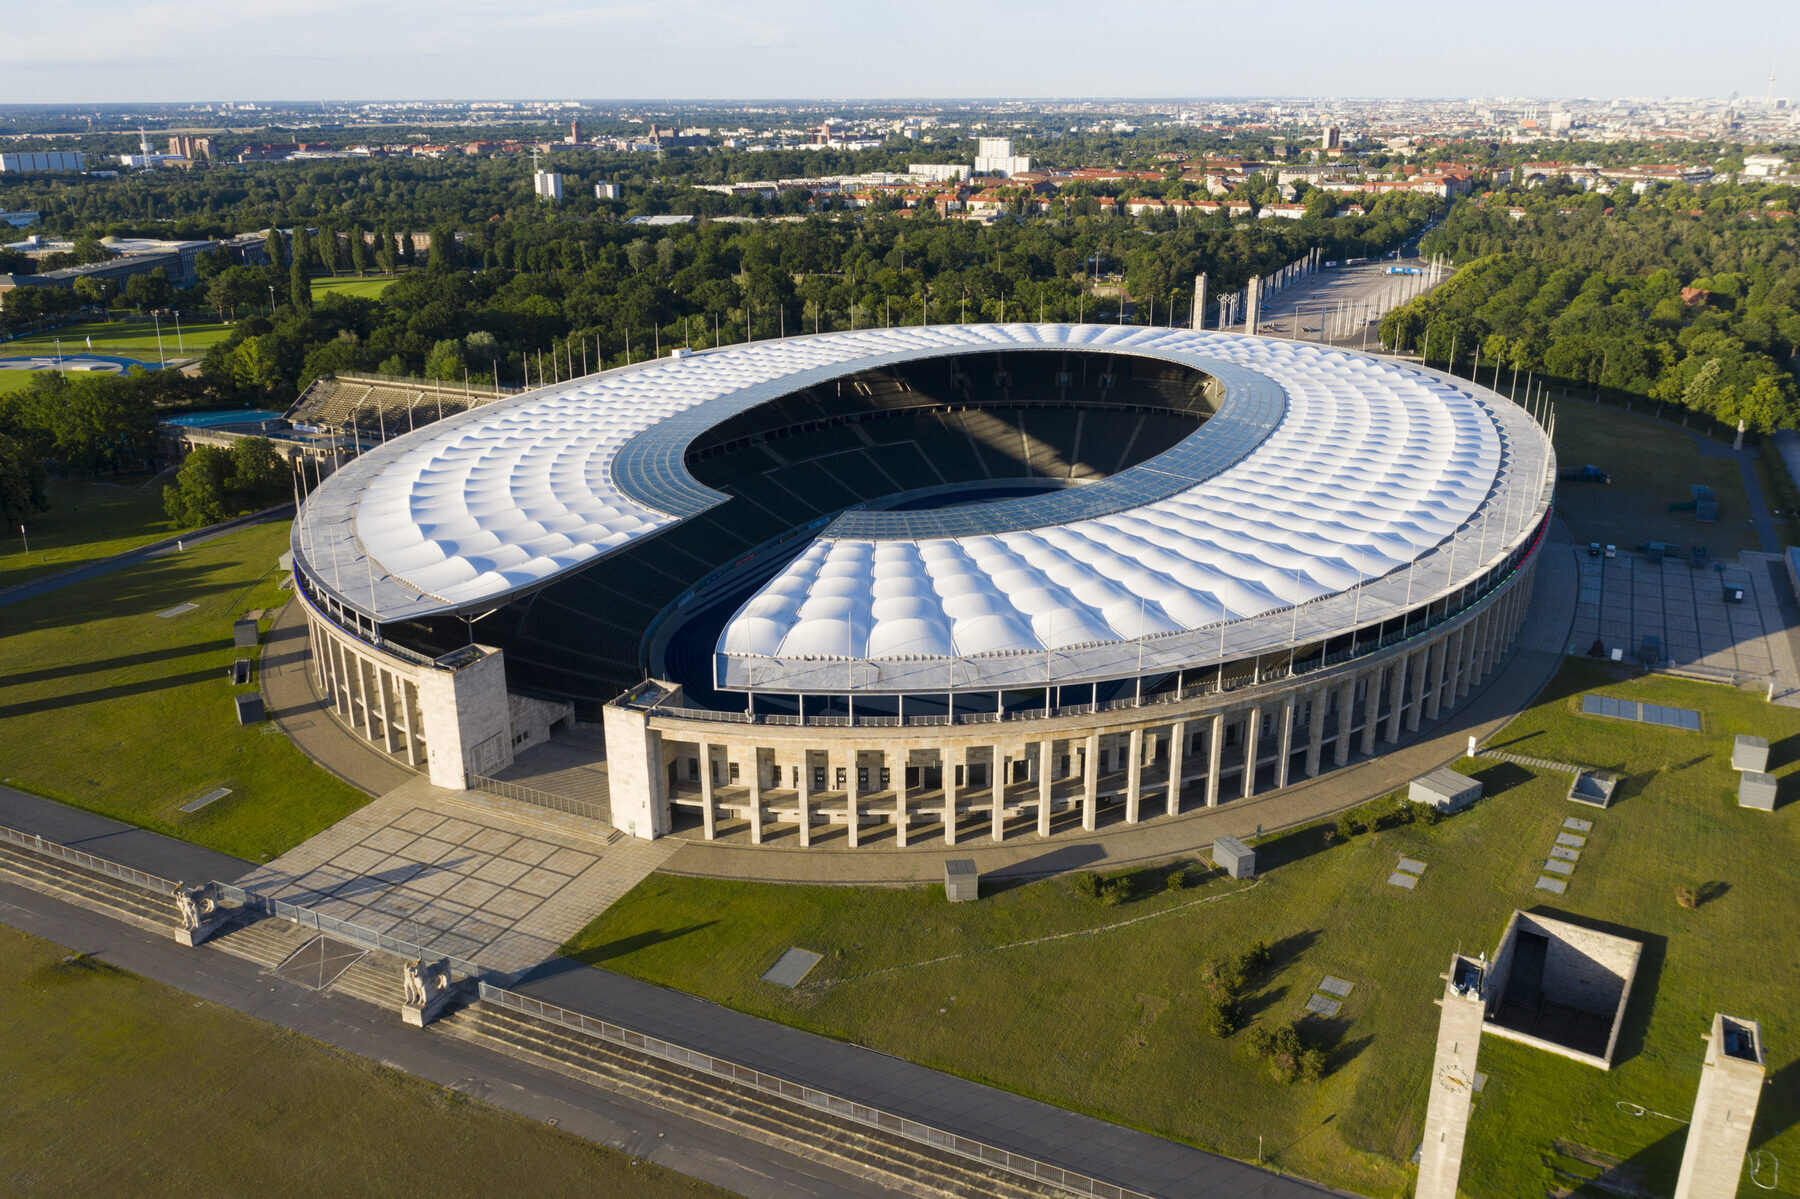 17-astonishing-facts-about-olympic-stadium-there-are-several-by-this-name-e-g-in-london-berlin-rome